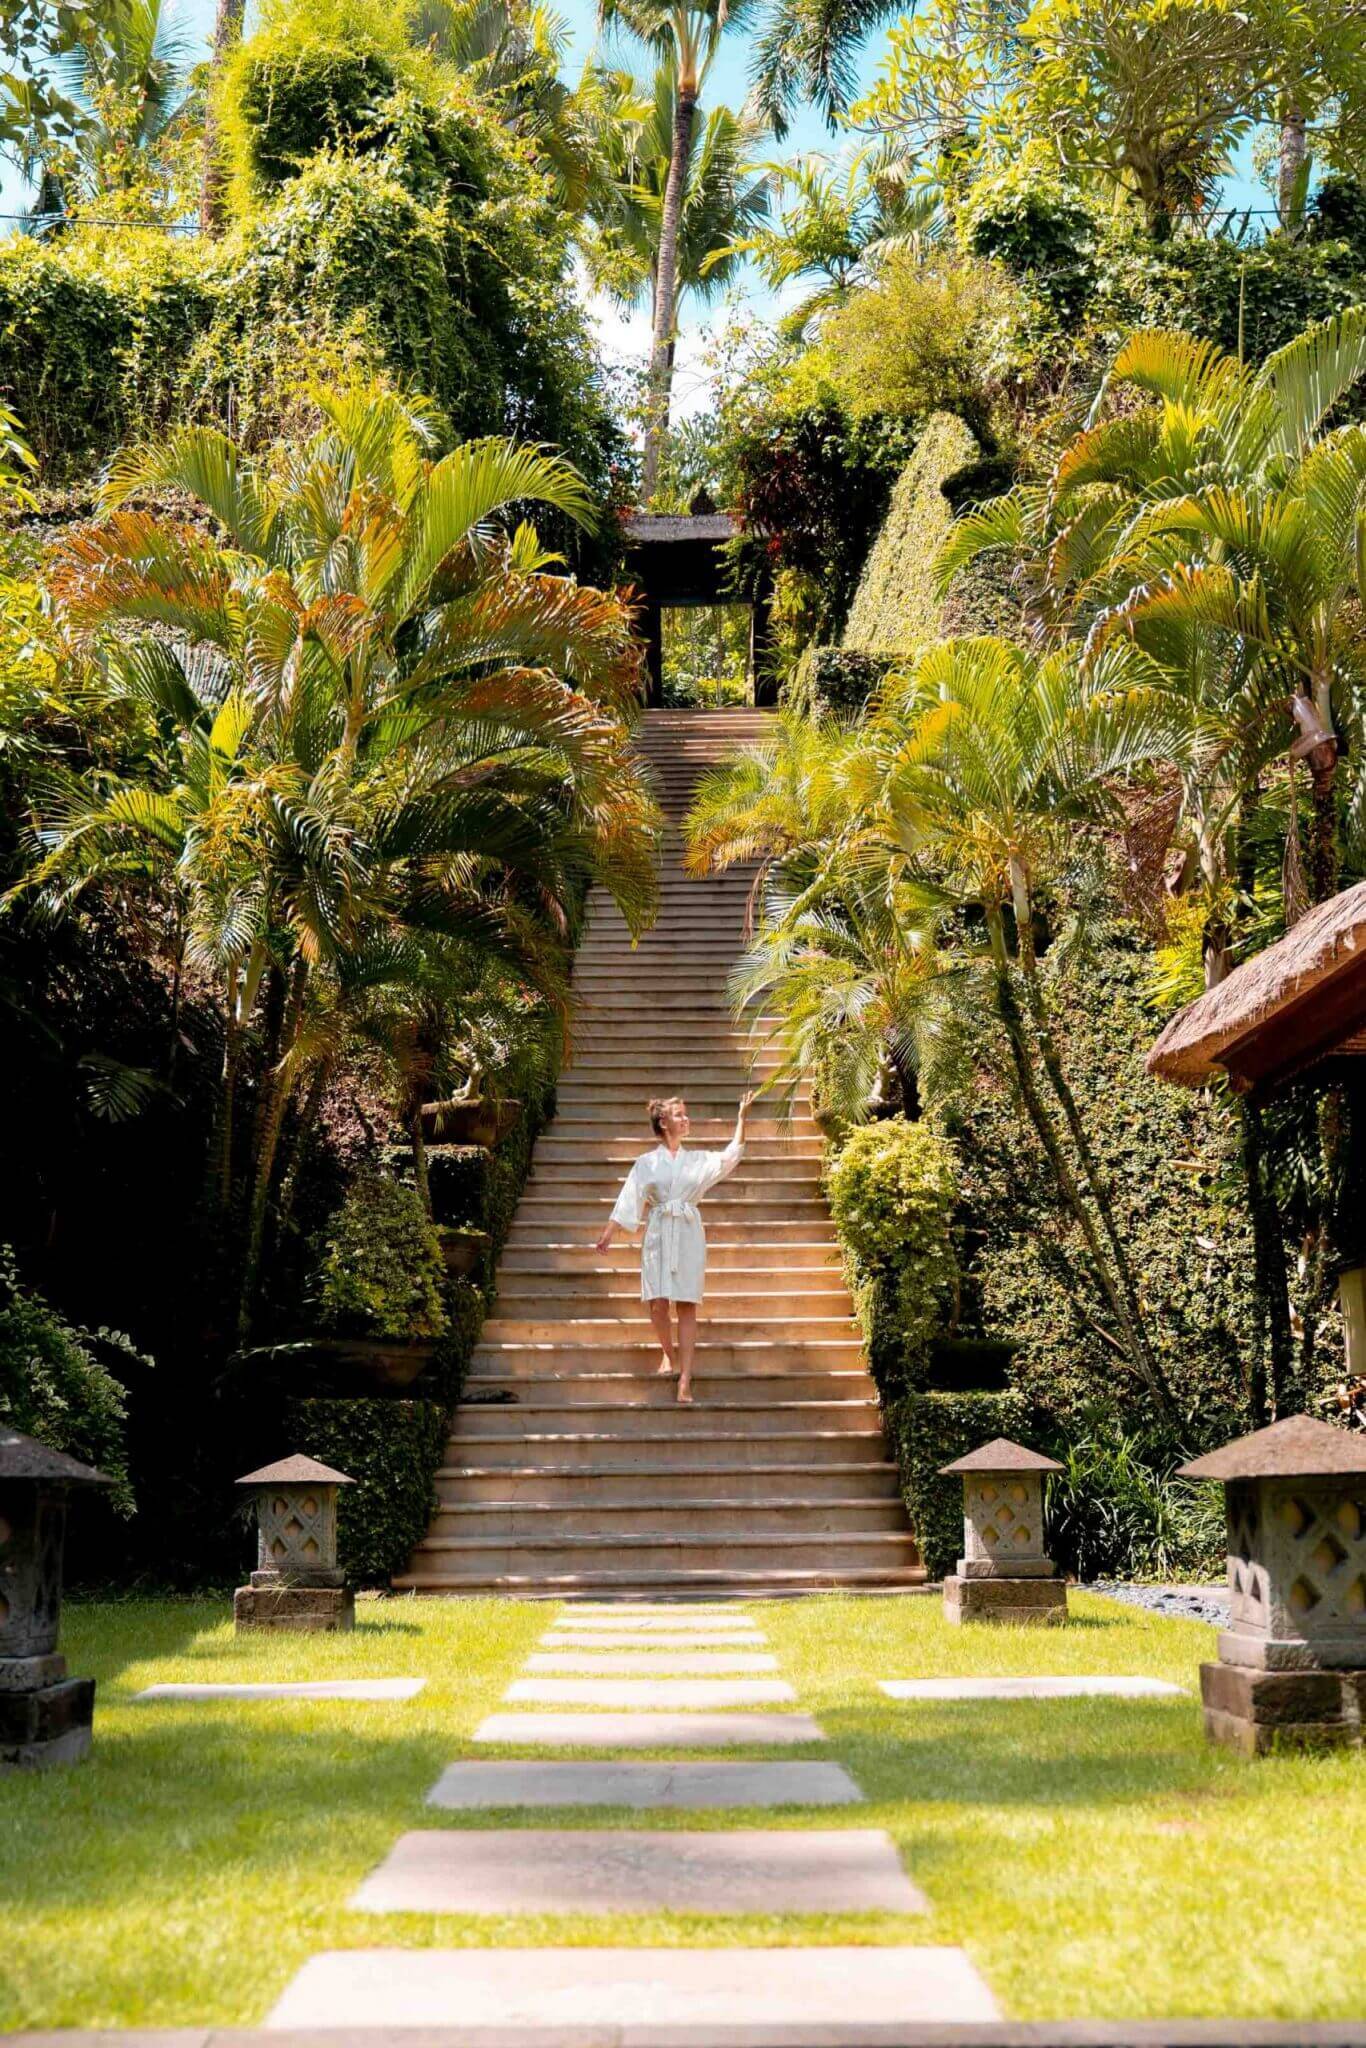 A wellness guide to Bali: The best retreats, cafes and places to visit